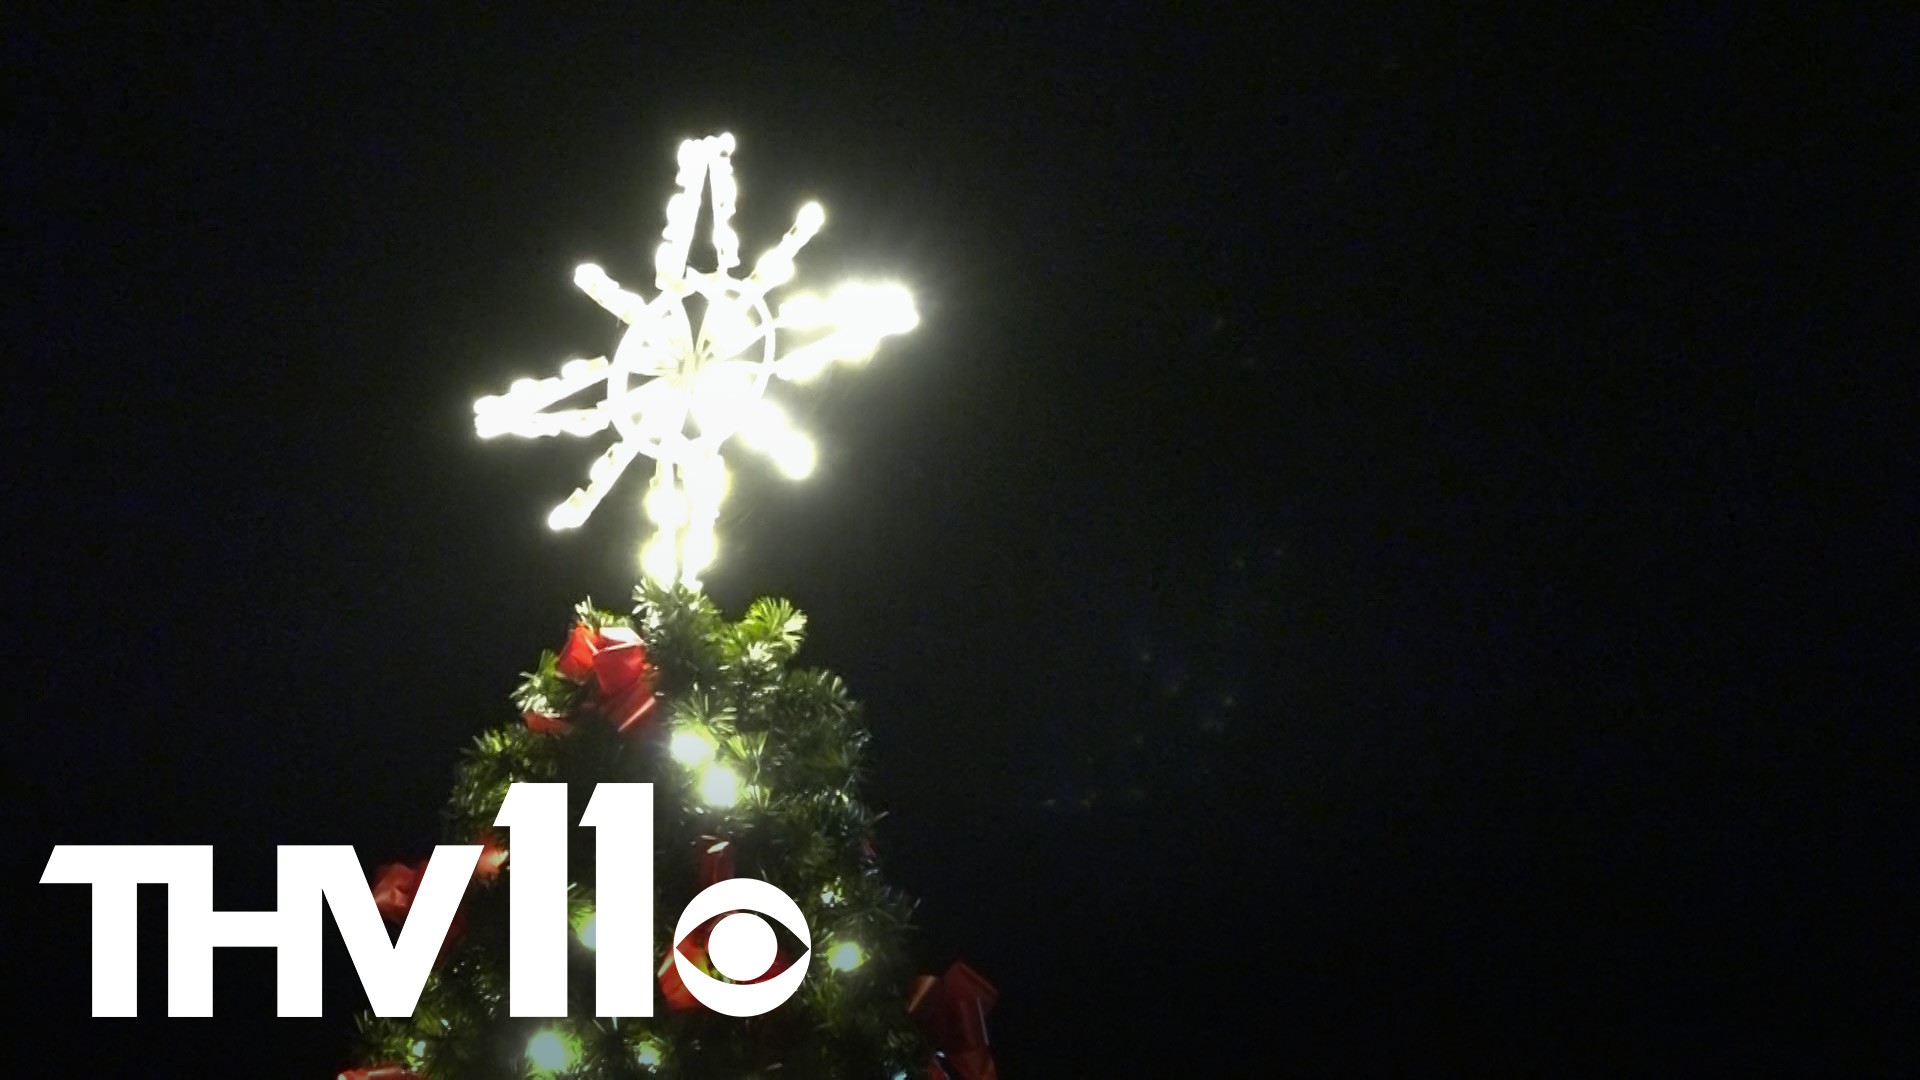 The Pine Bluff community celebrated a Christmas tree lighting event after a hard year.